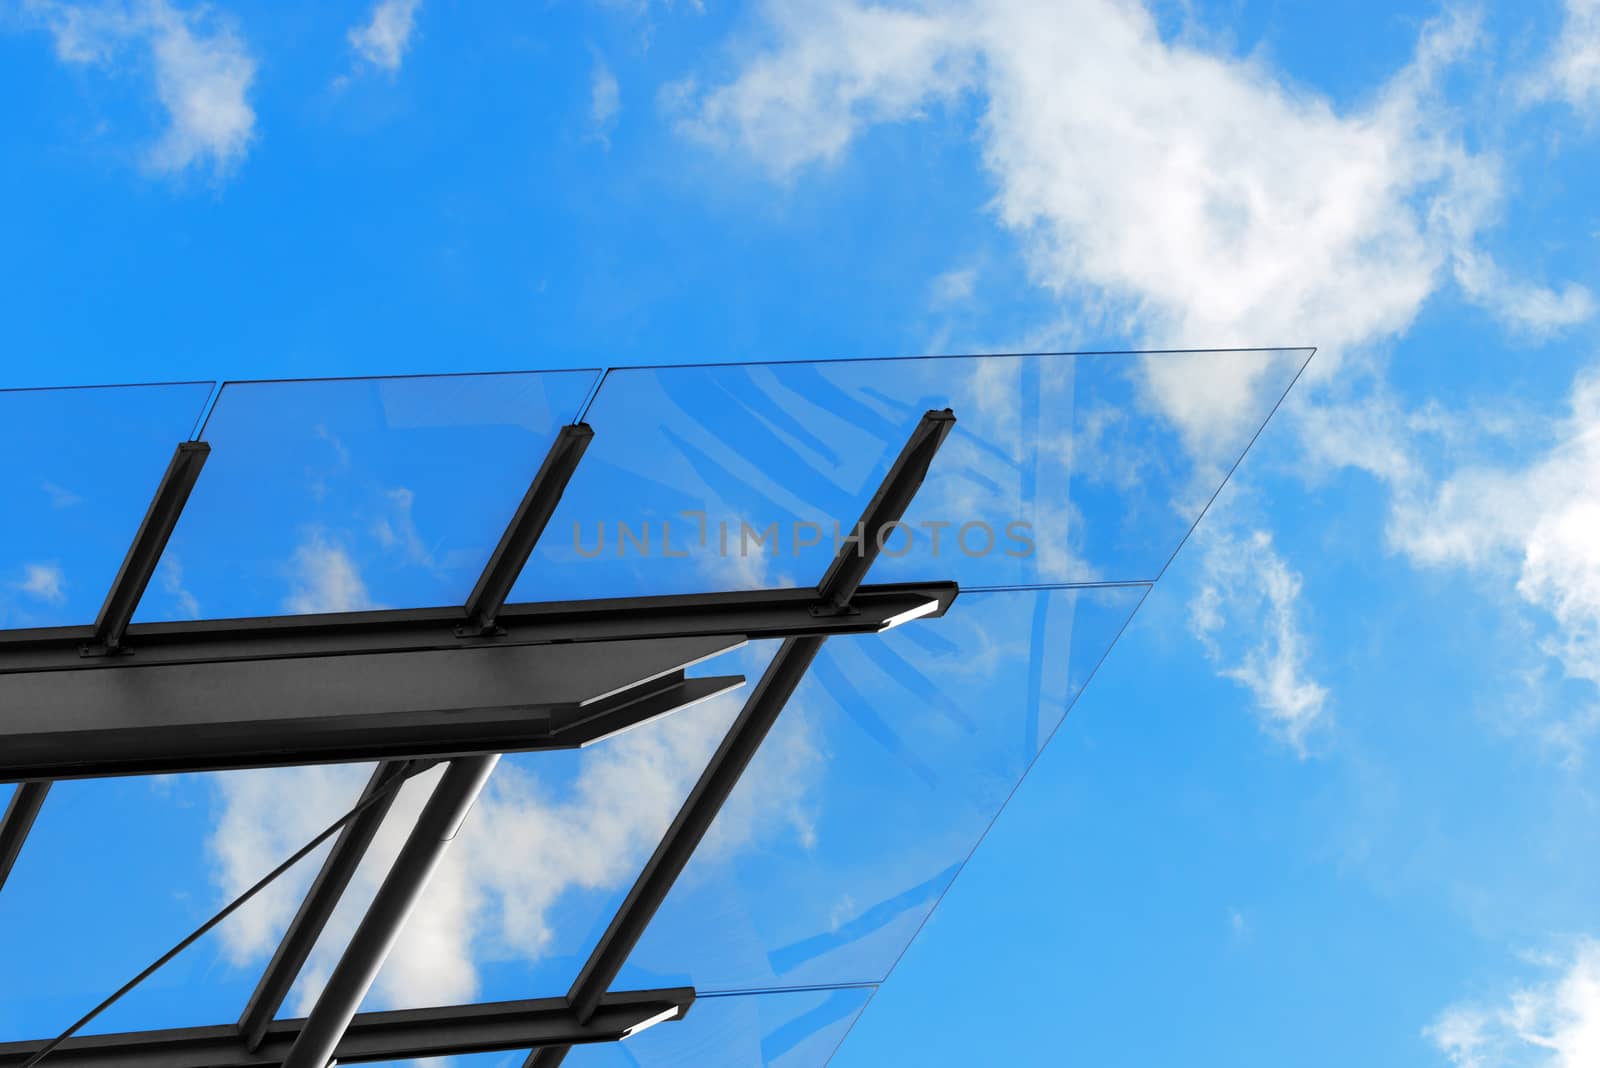 Detail of steel and glass roof of a modern building with blue sky and clouds